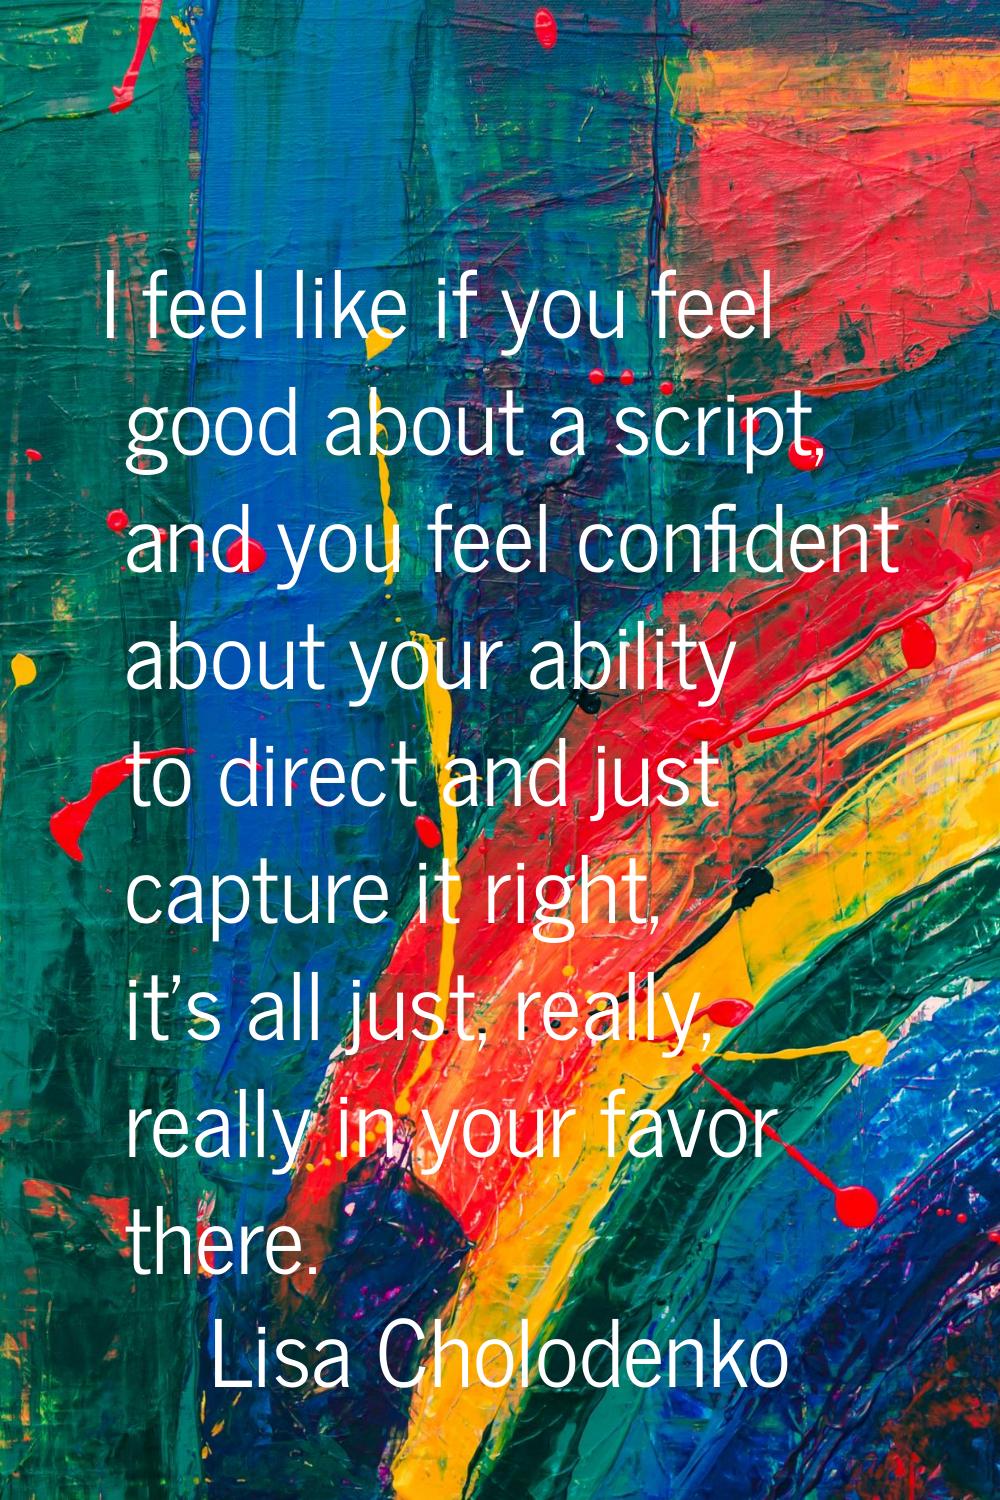 I feel like if you feel good about a script, and you feel confident about your ability to direct an